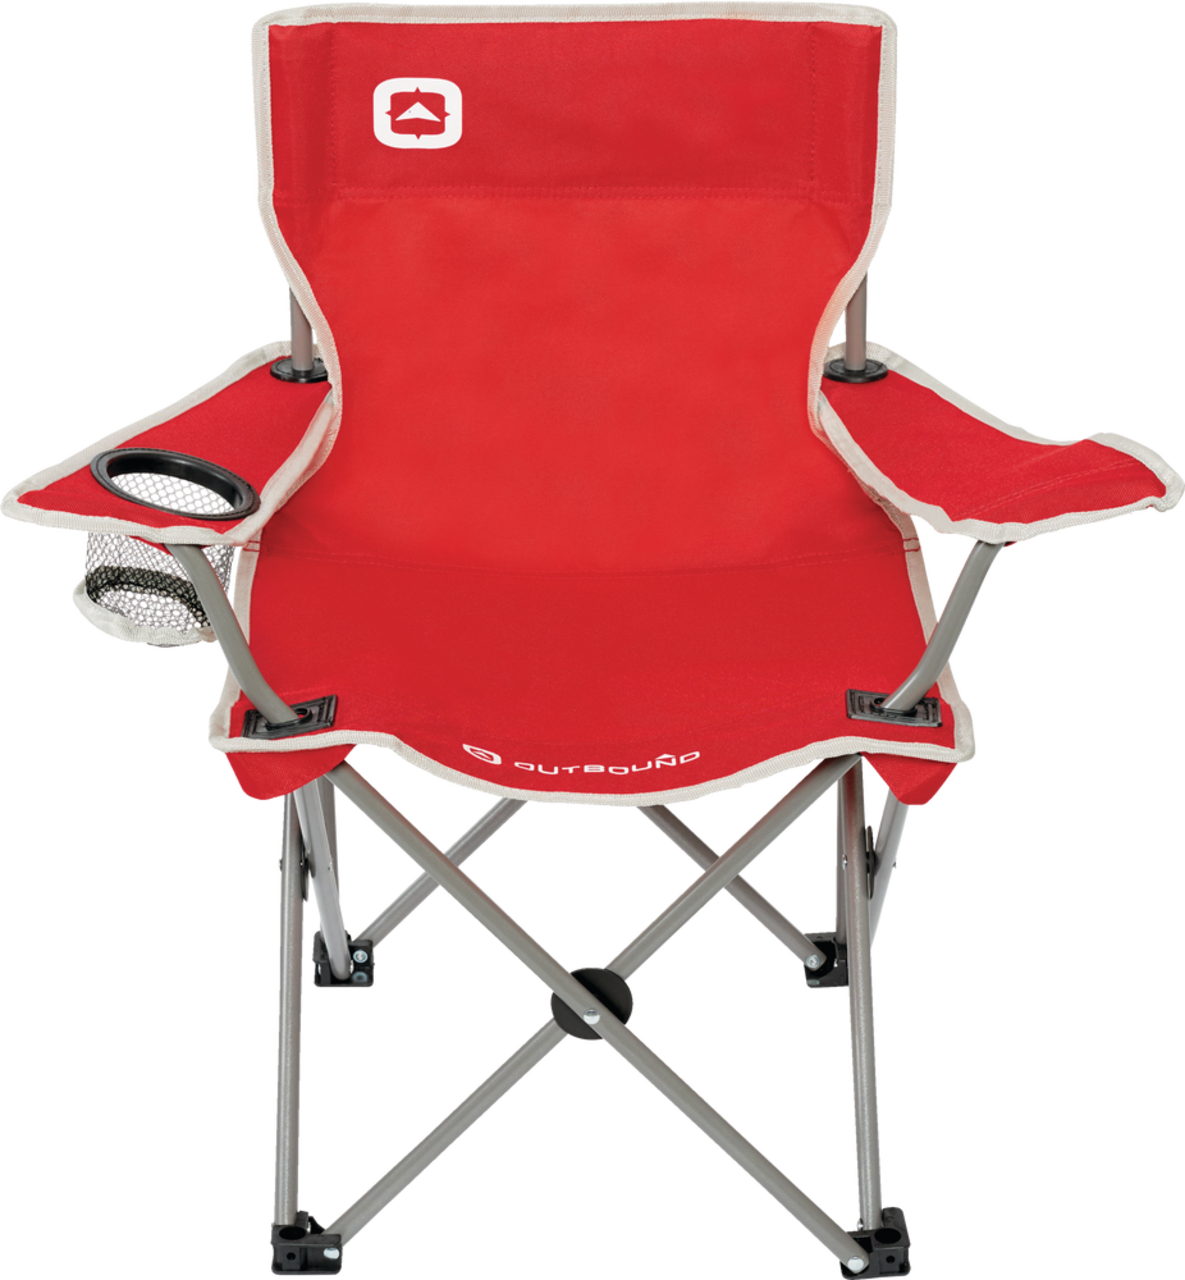 Outbound Kids' Mesh Back Folding Camping Quad Chair w/ Cup Holder